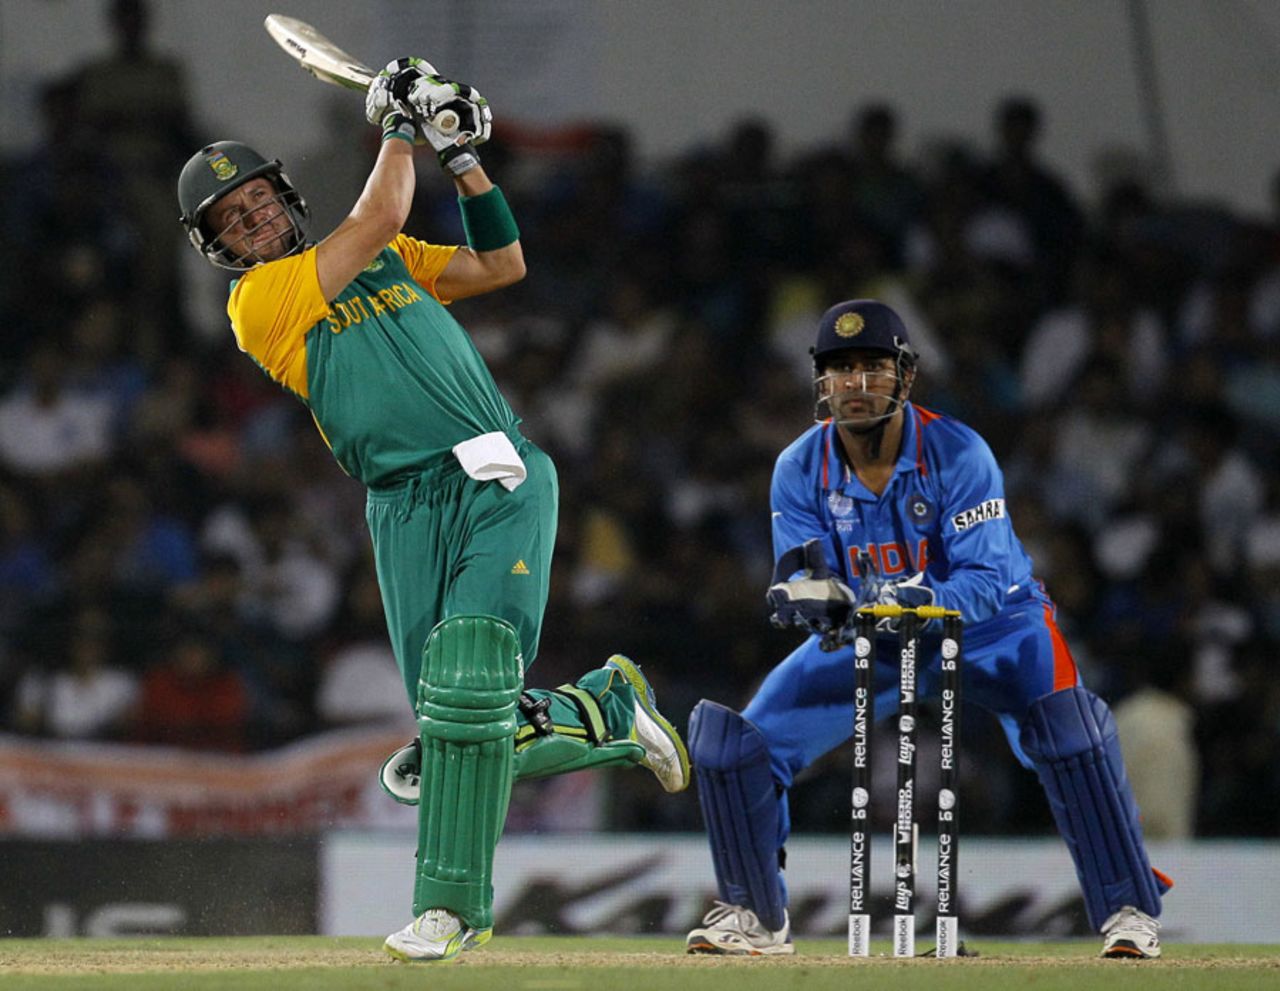 AB de Villiers hits a six, India v South Africa, Group B, World Cup, Nagpur, March 12, 2011